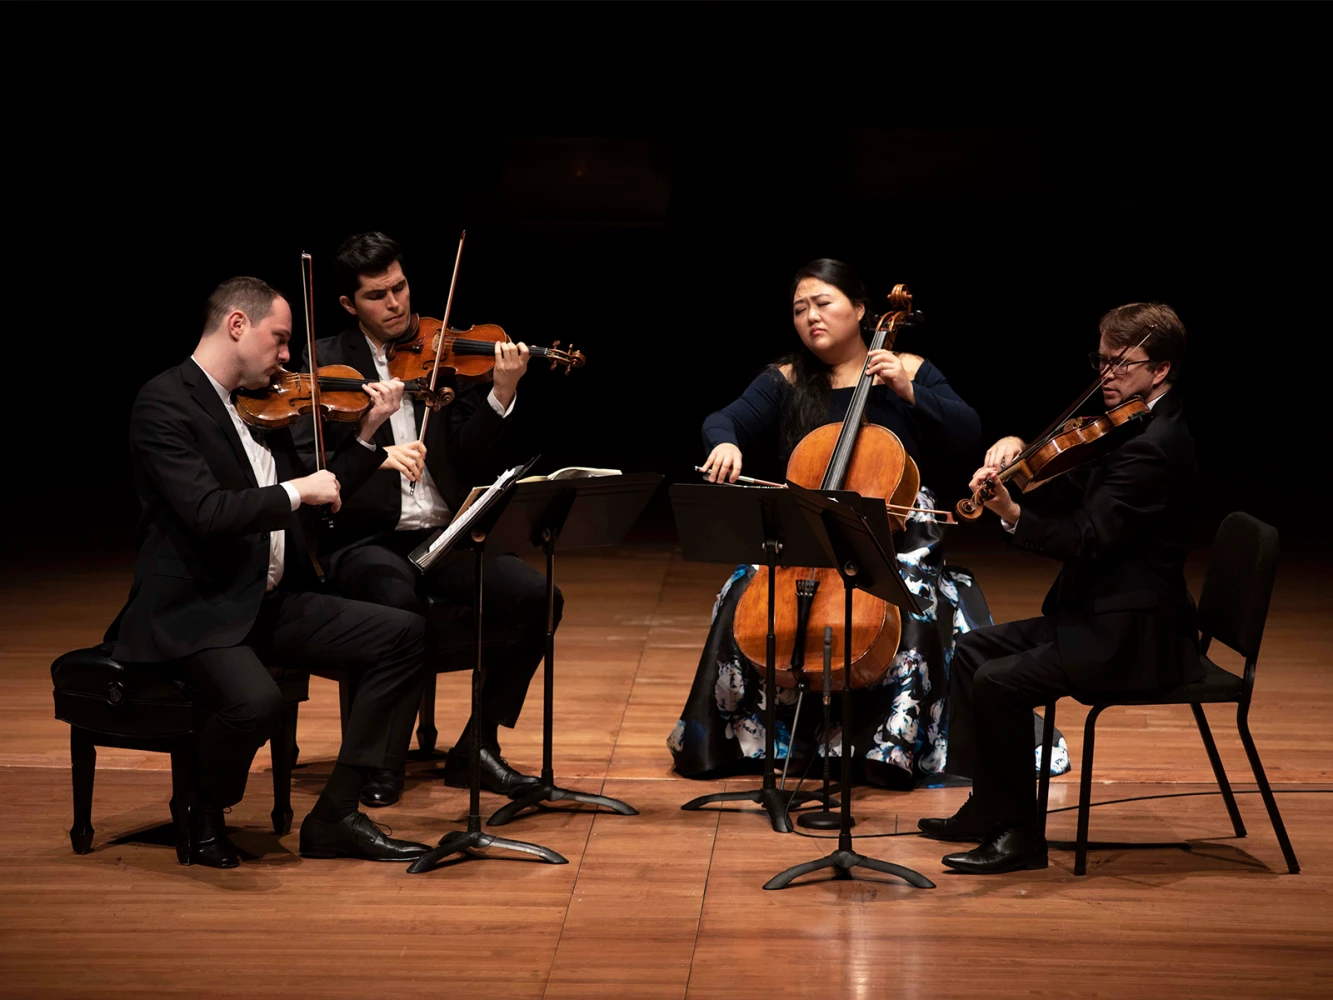 The Chamber Music Society of Lincoln Center: The Calidore String Quartet: What to expect - 3